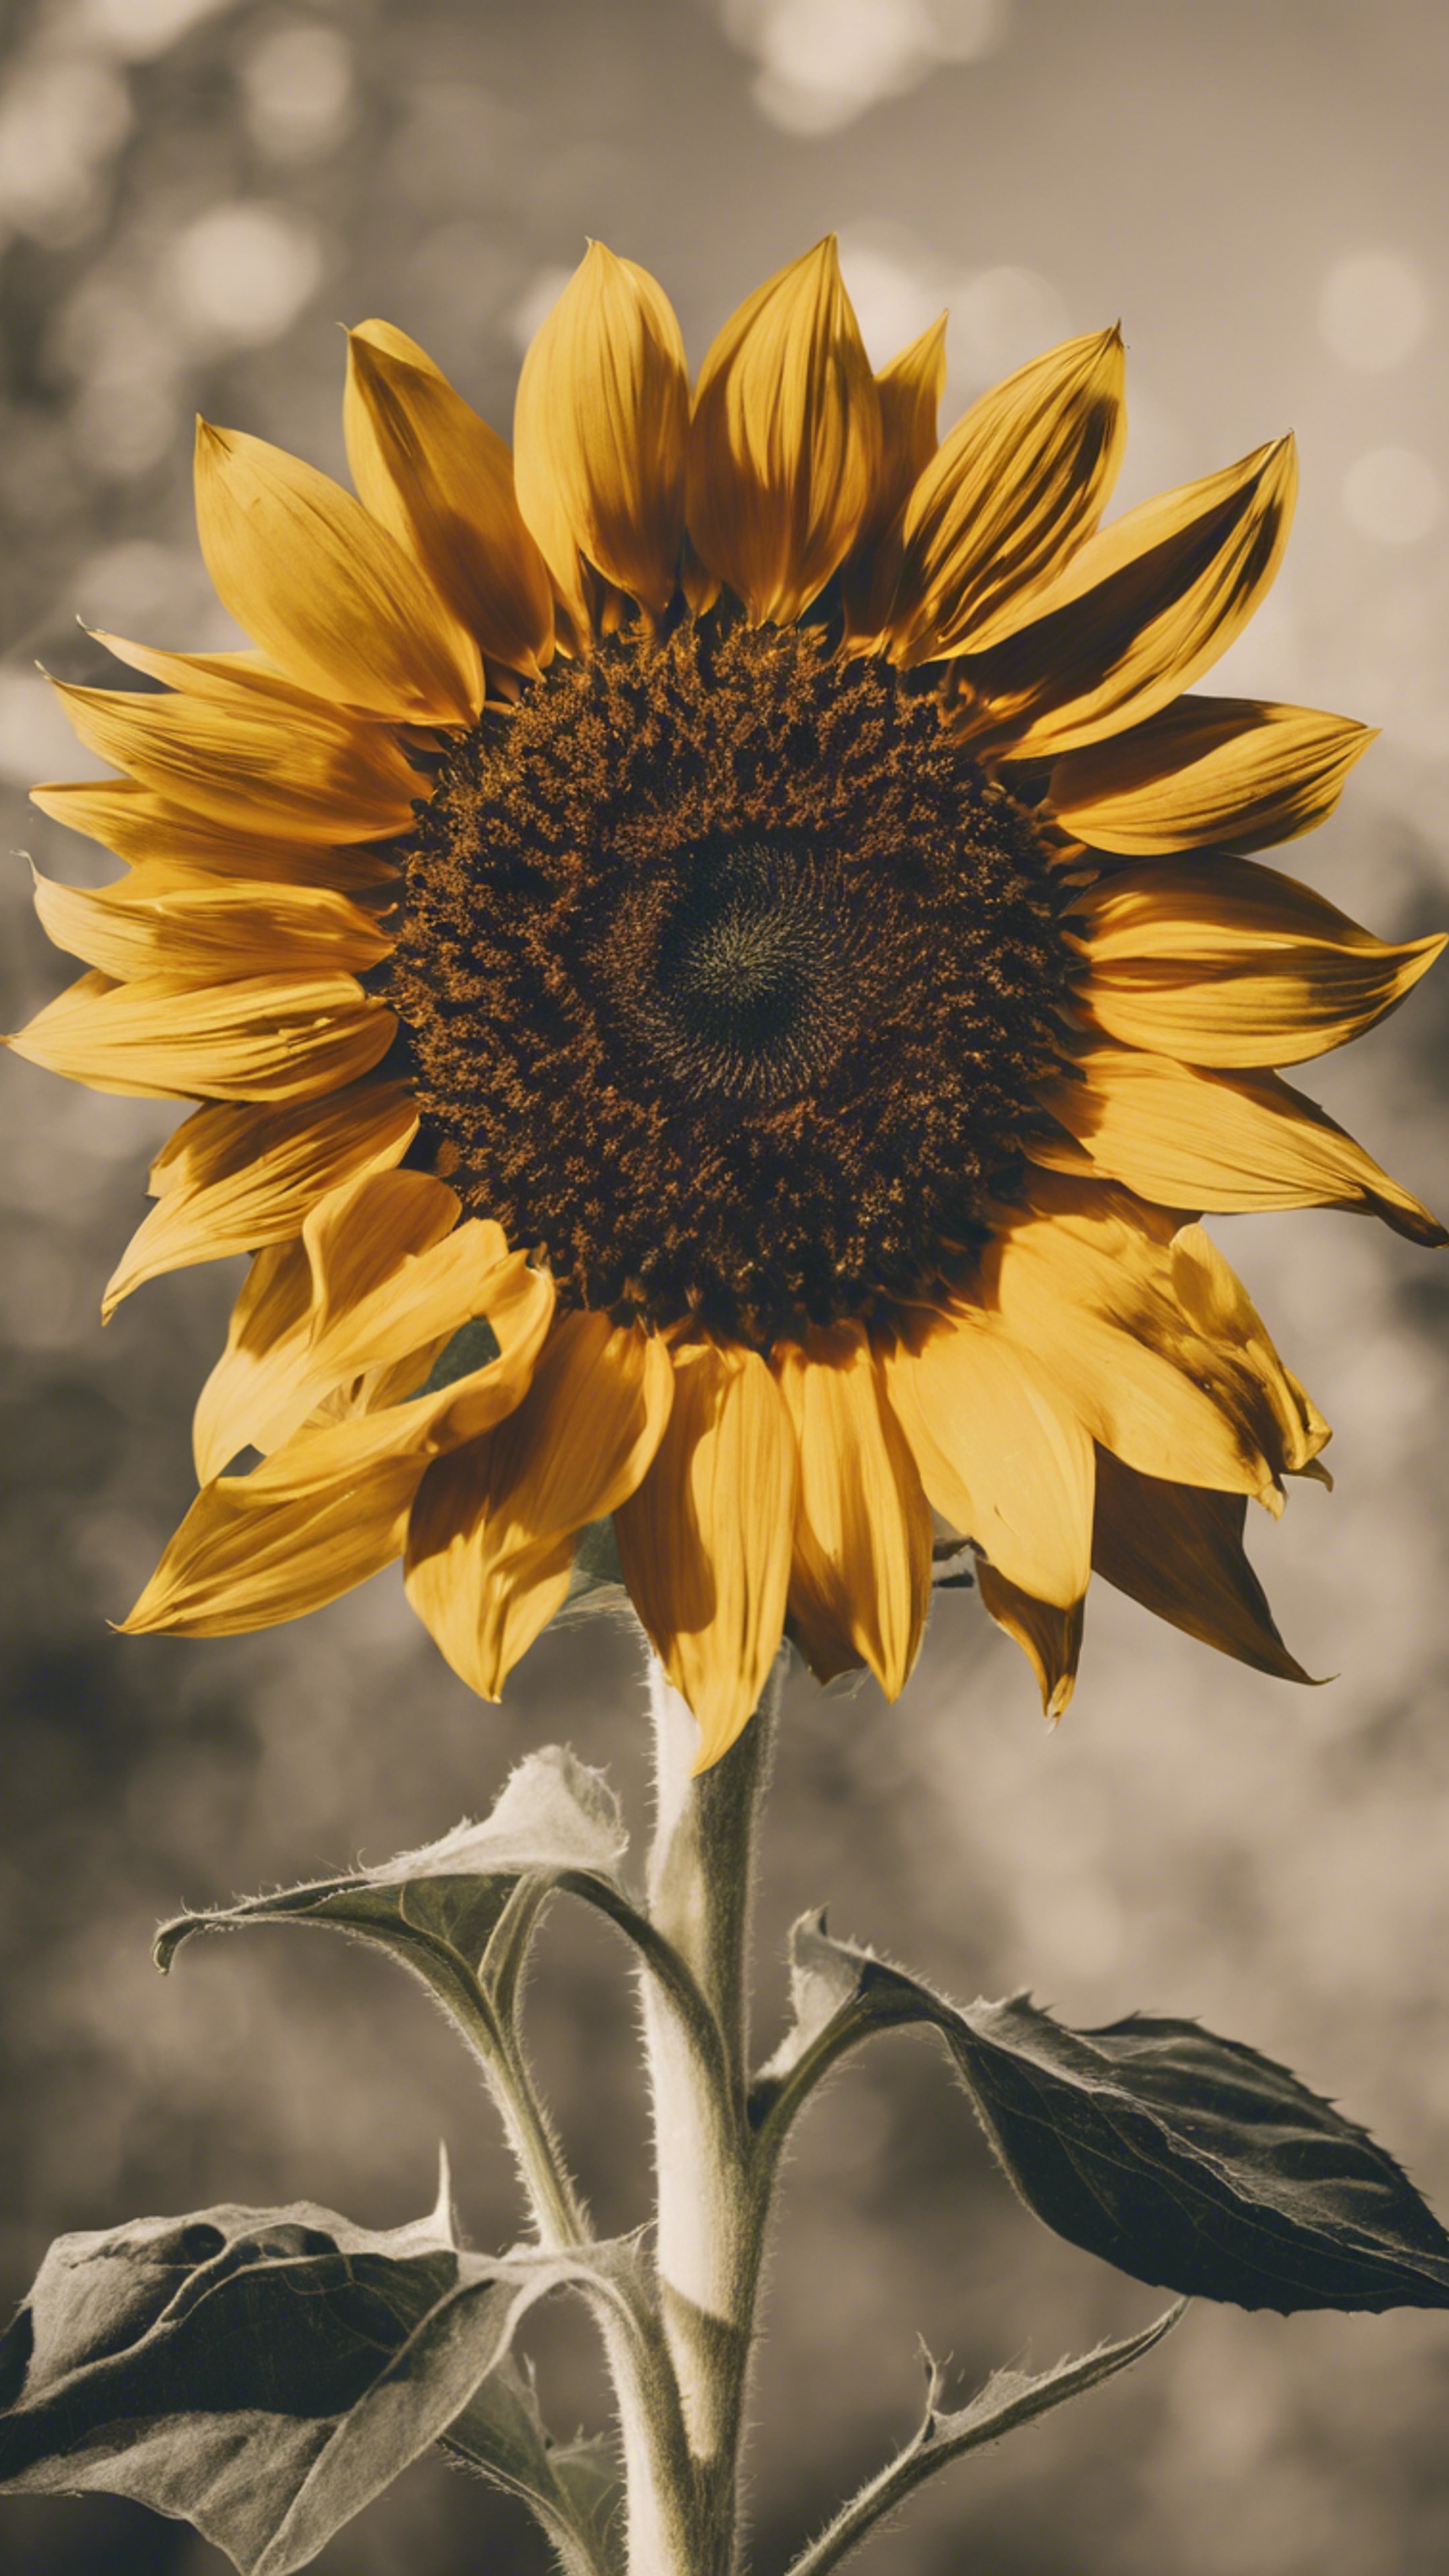 A stylized retro sunflower with bold yellow petals and a dark brown center. Tapeta[13785a0774844f708a81]